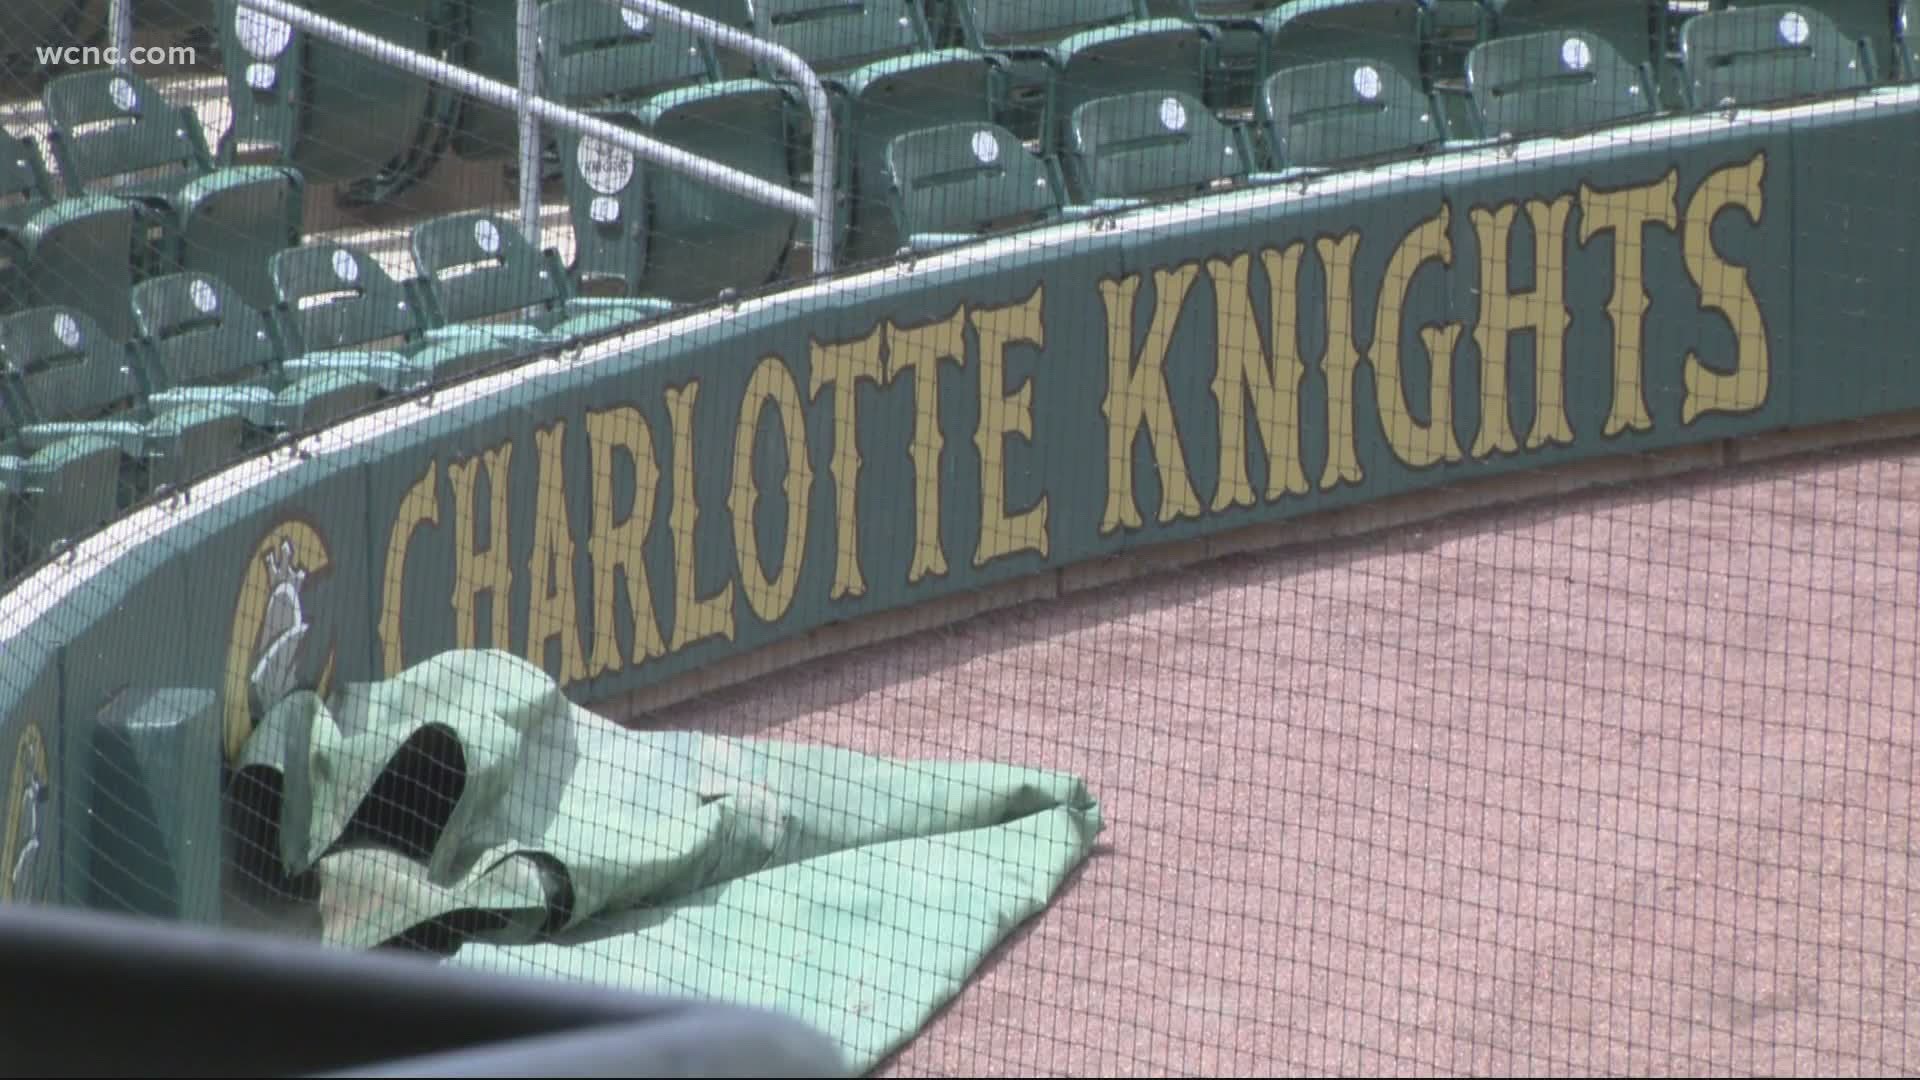 Baseball returns to the Queen City Tuesday as the Charlotte Knights host their first home game since before the COVID-19 pandemic canceled the 2020 season.